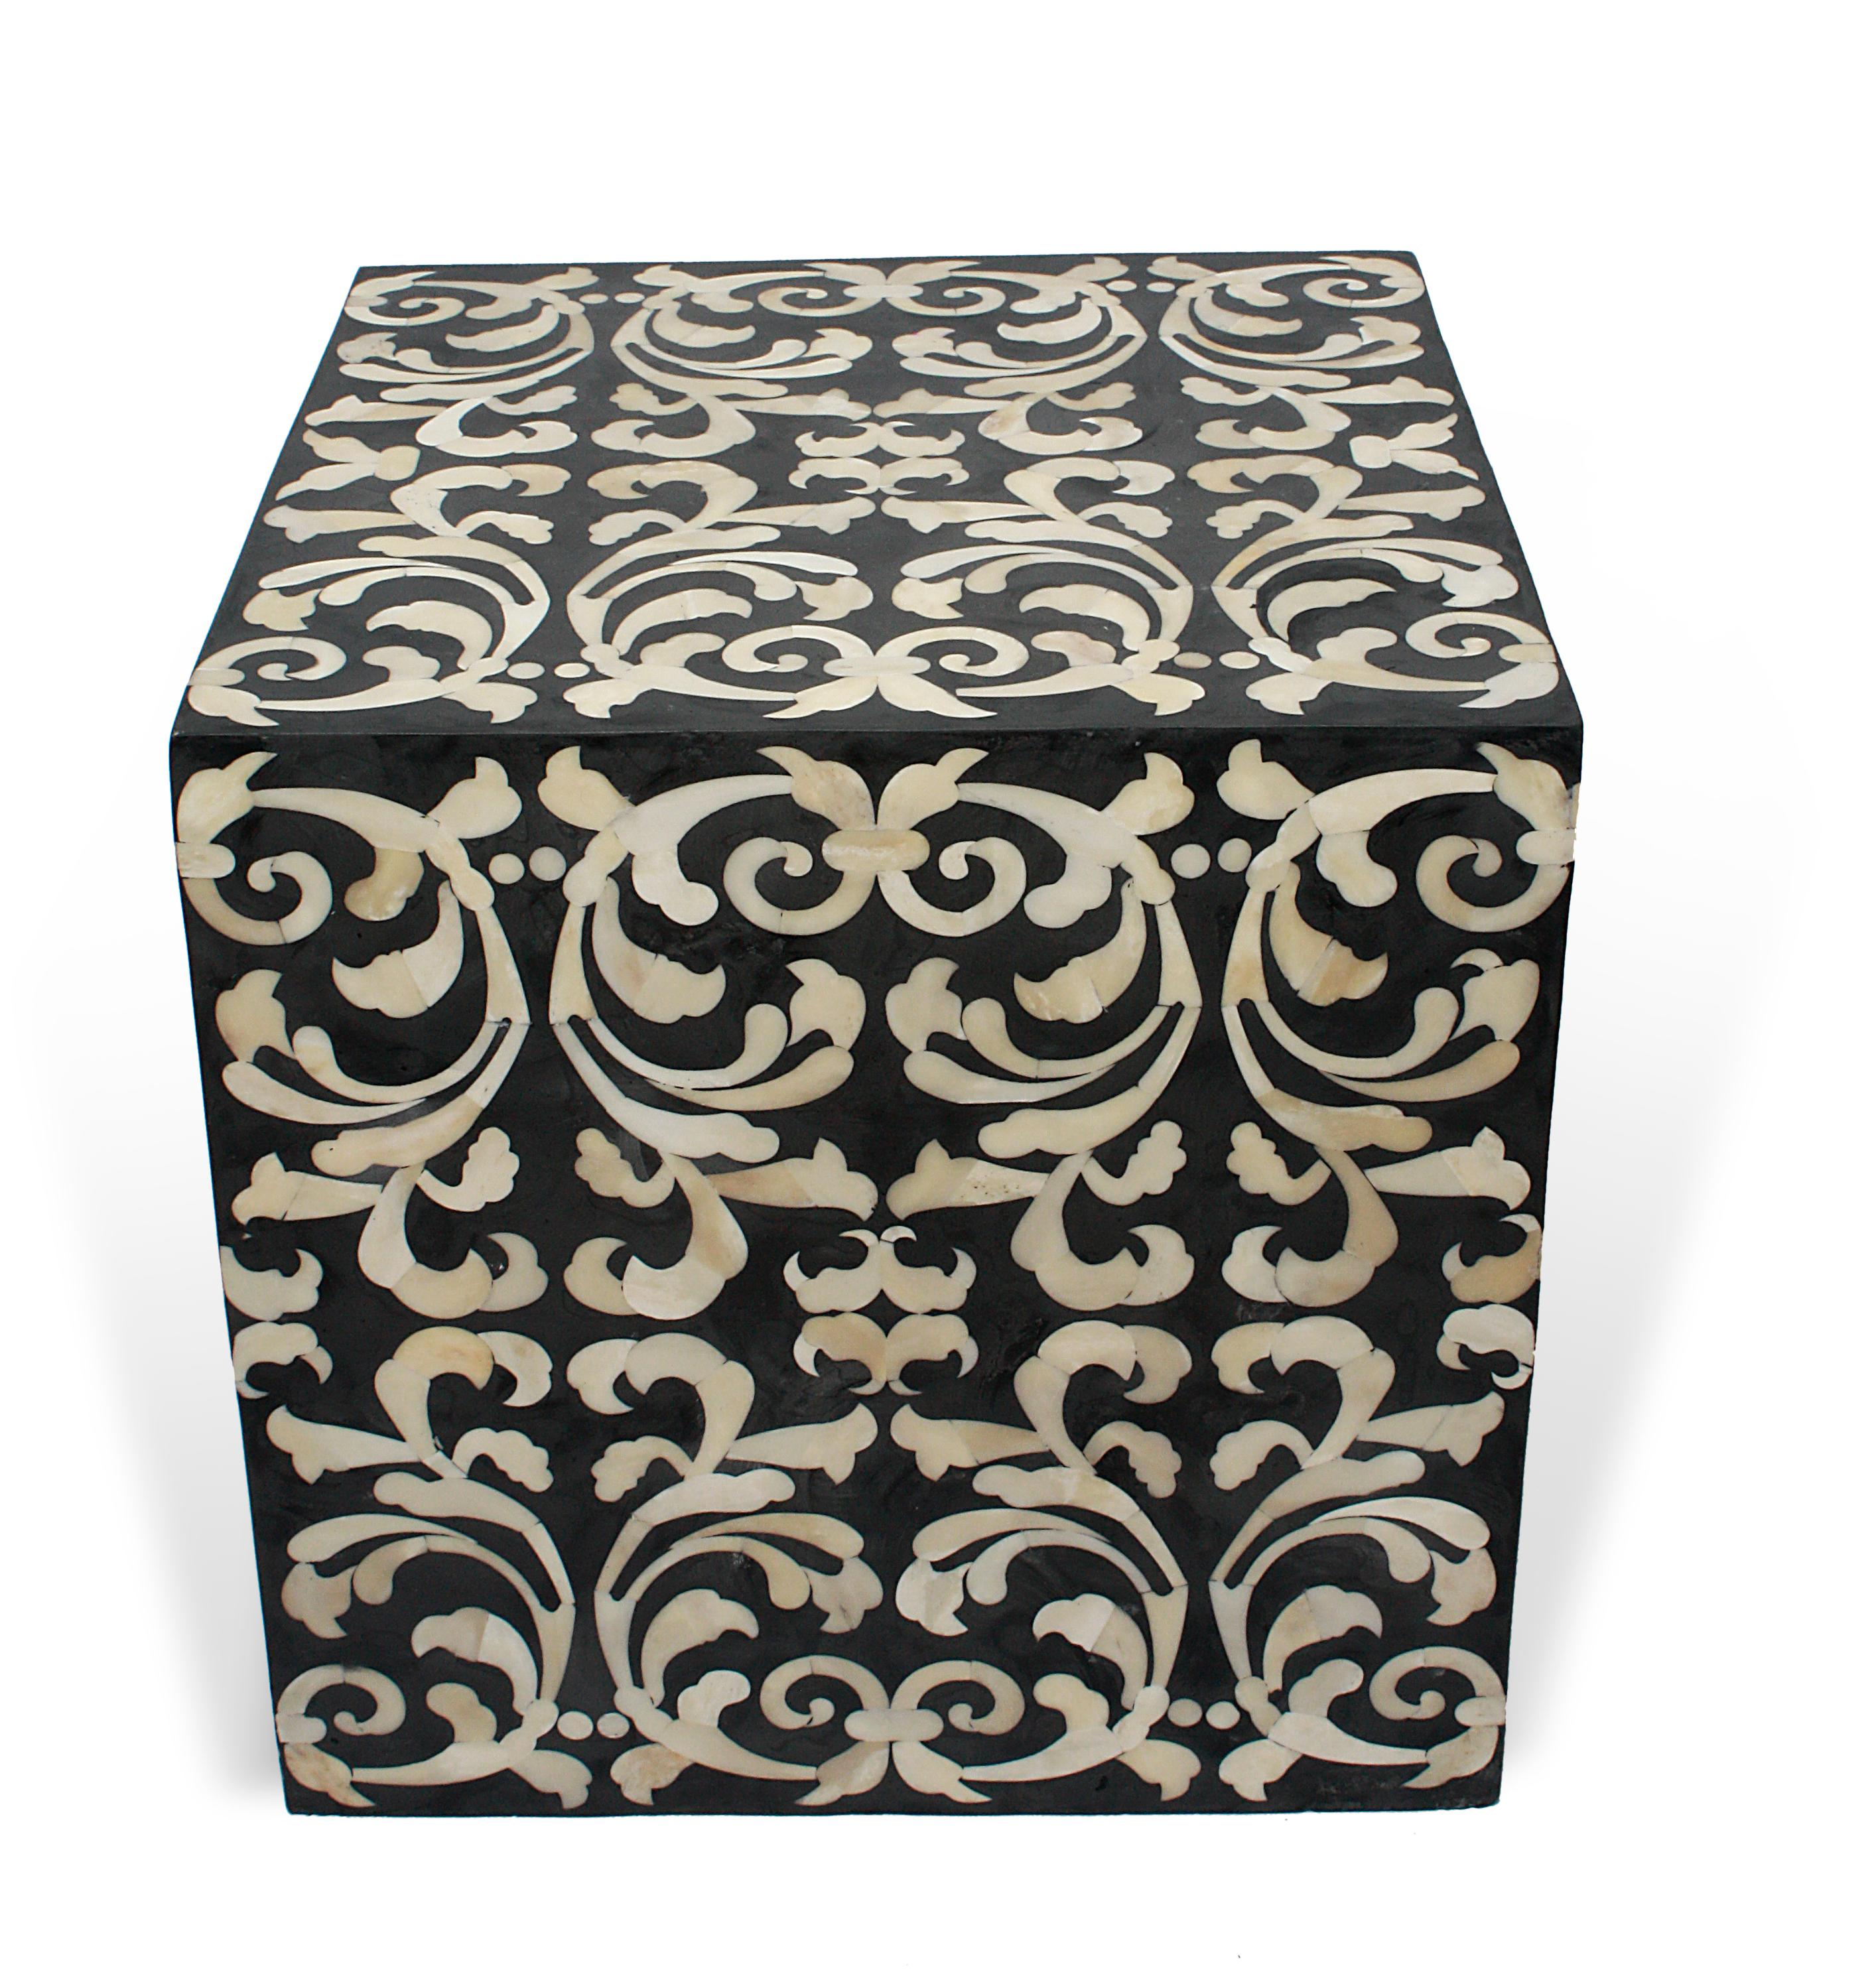 Baroque Revival Fleur Cube End Table / Stool Made with Grey/ Black Resin with Baroque Bone Inlay